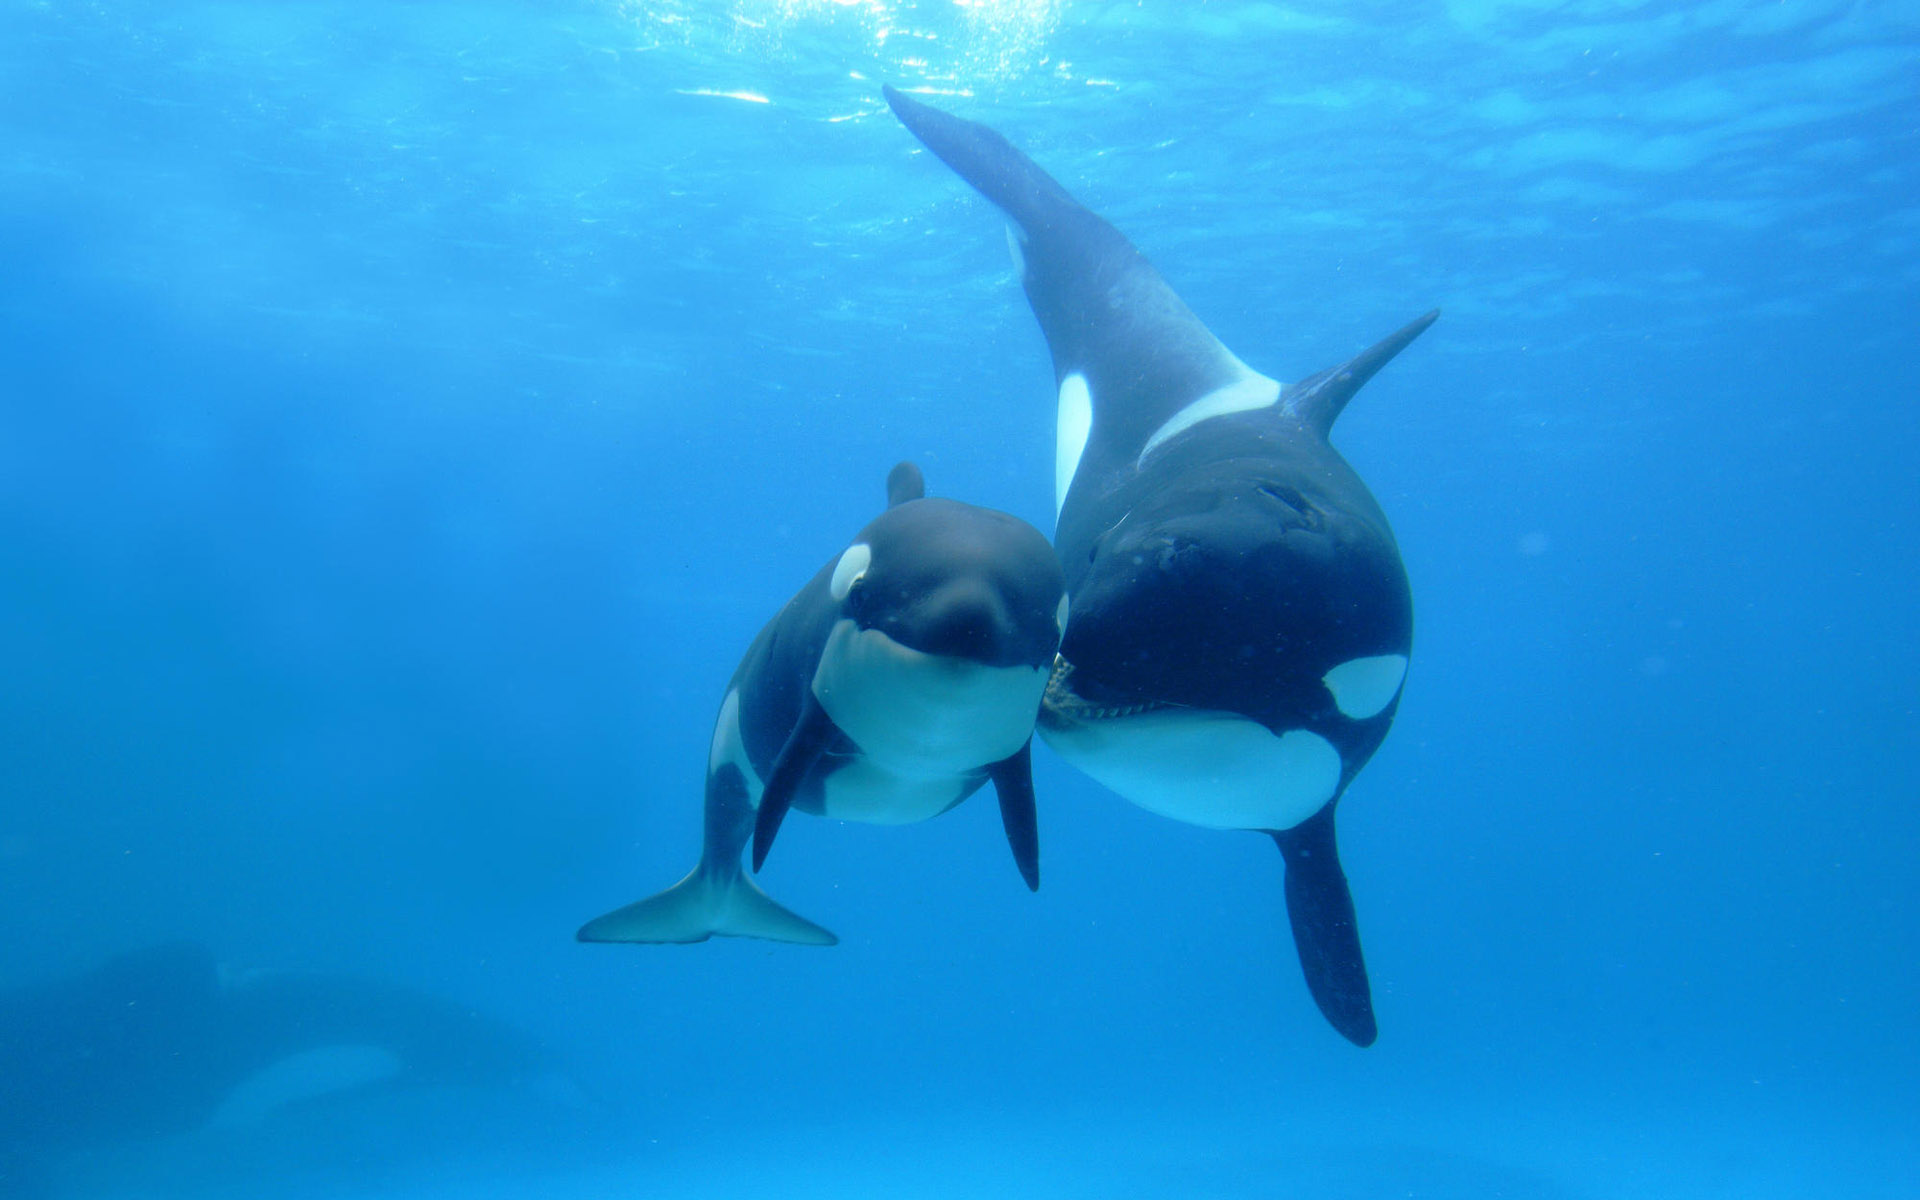 Mother and baby killer whales